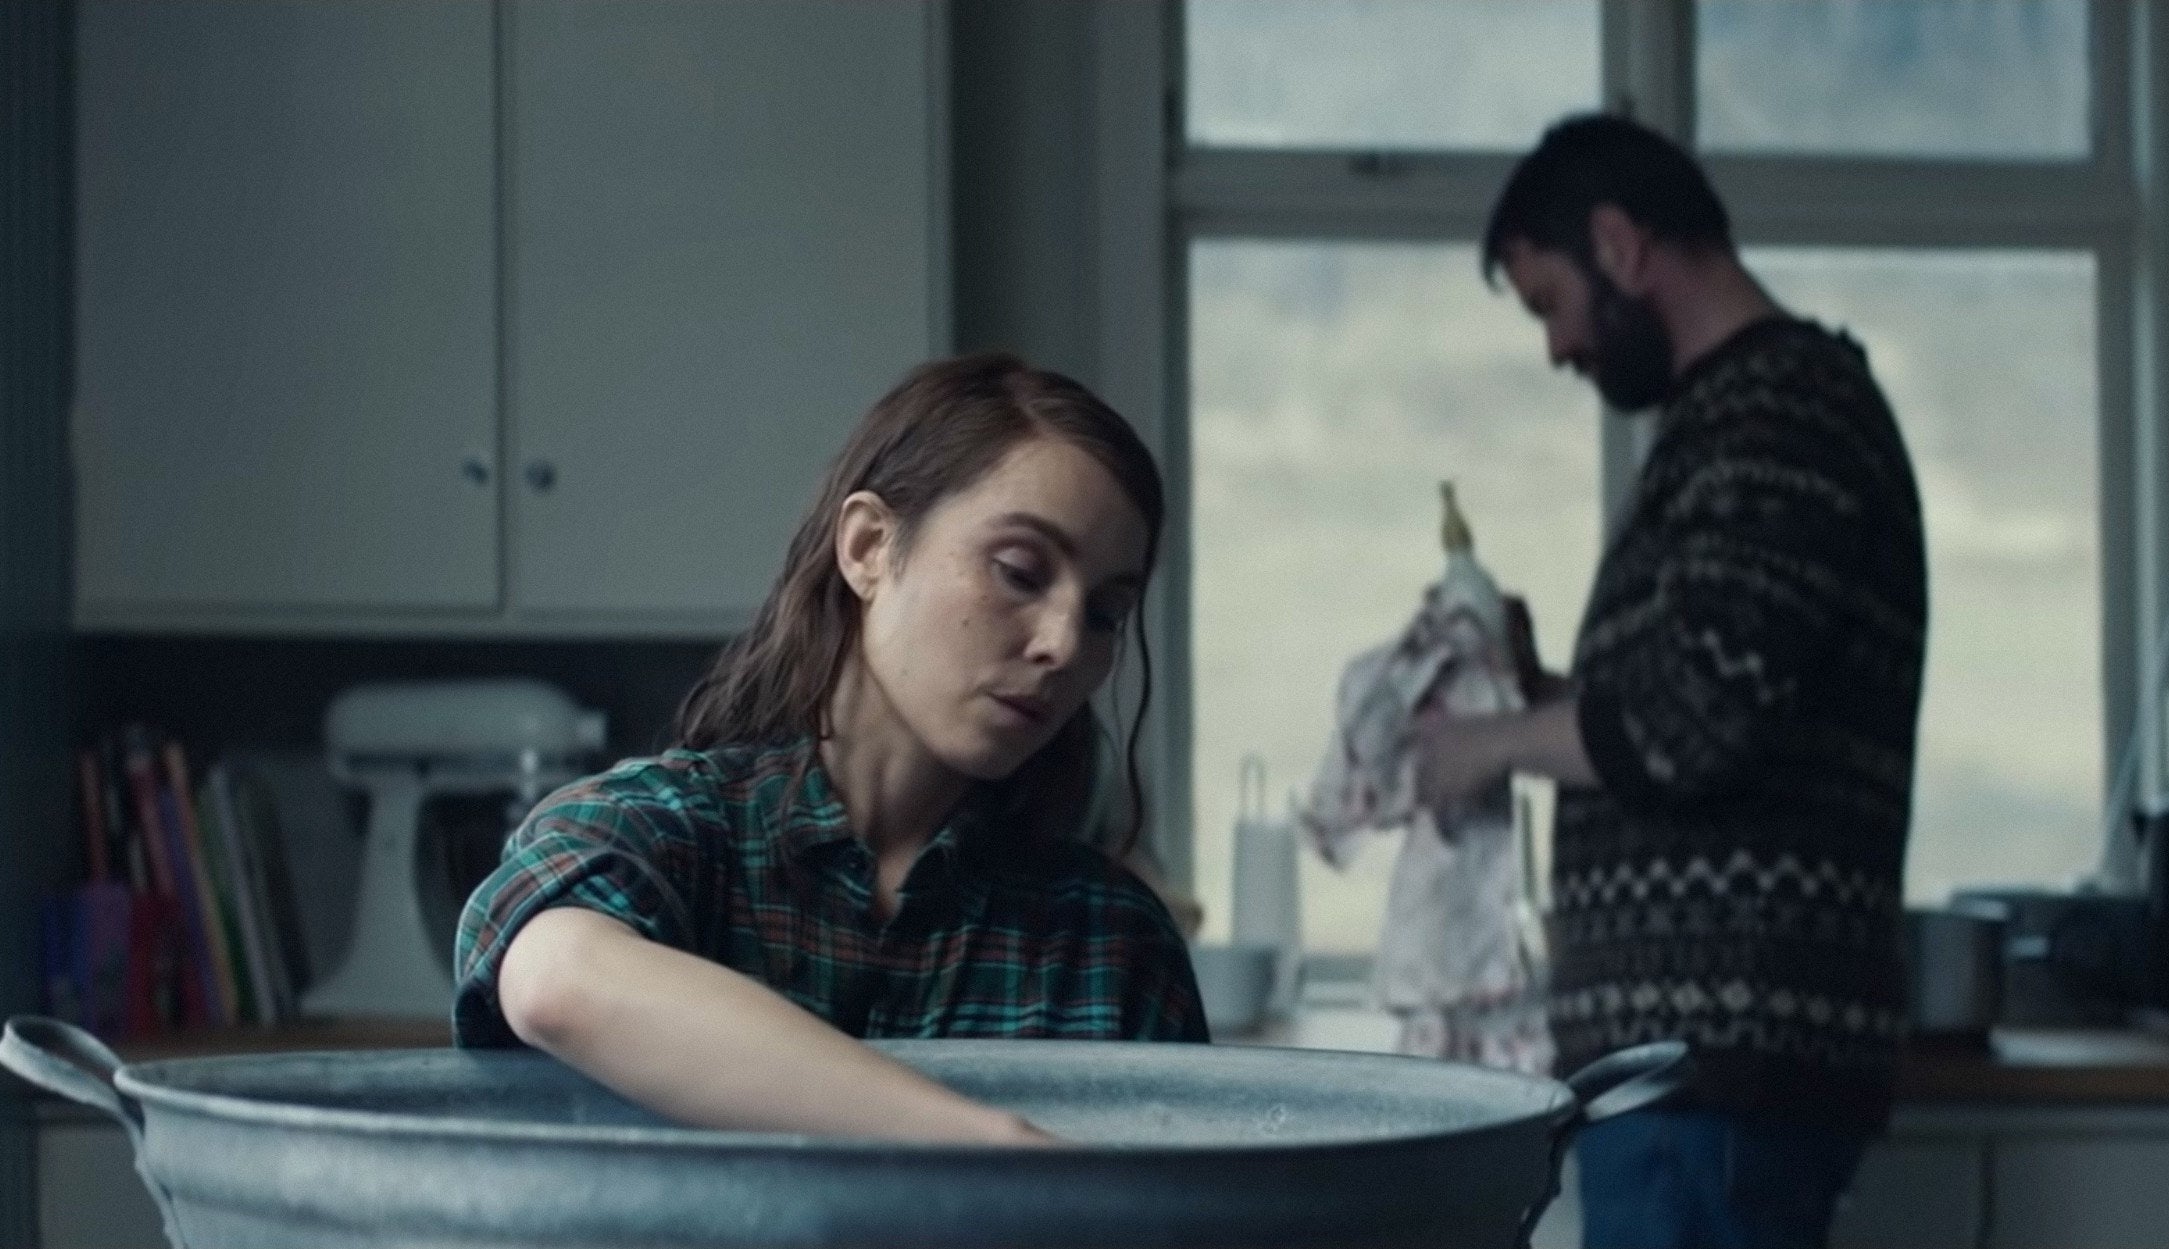 Noomi Rapace and Hilmir Snaer Gudnasan stand in a kitchen